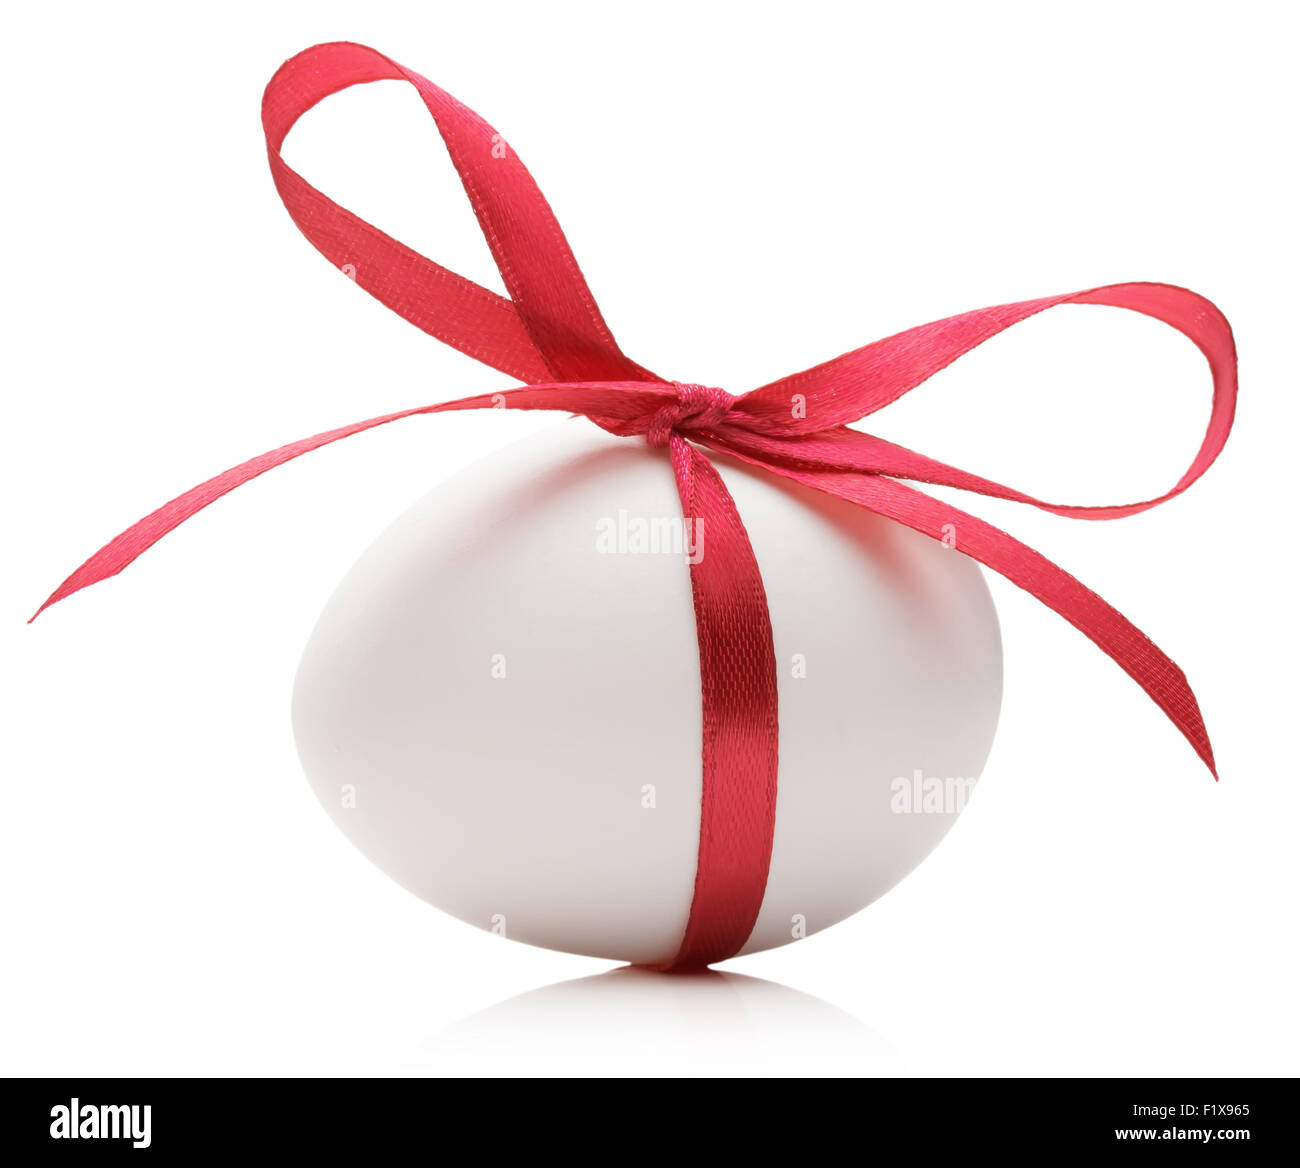 Easter egg with festive red bow isolated on white background. Stock Photo